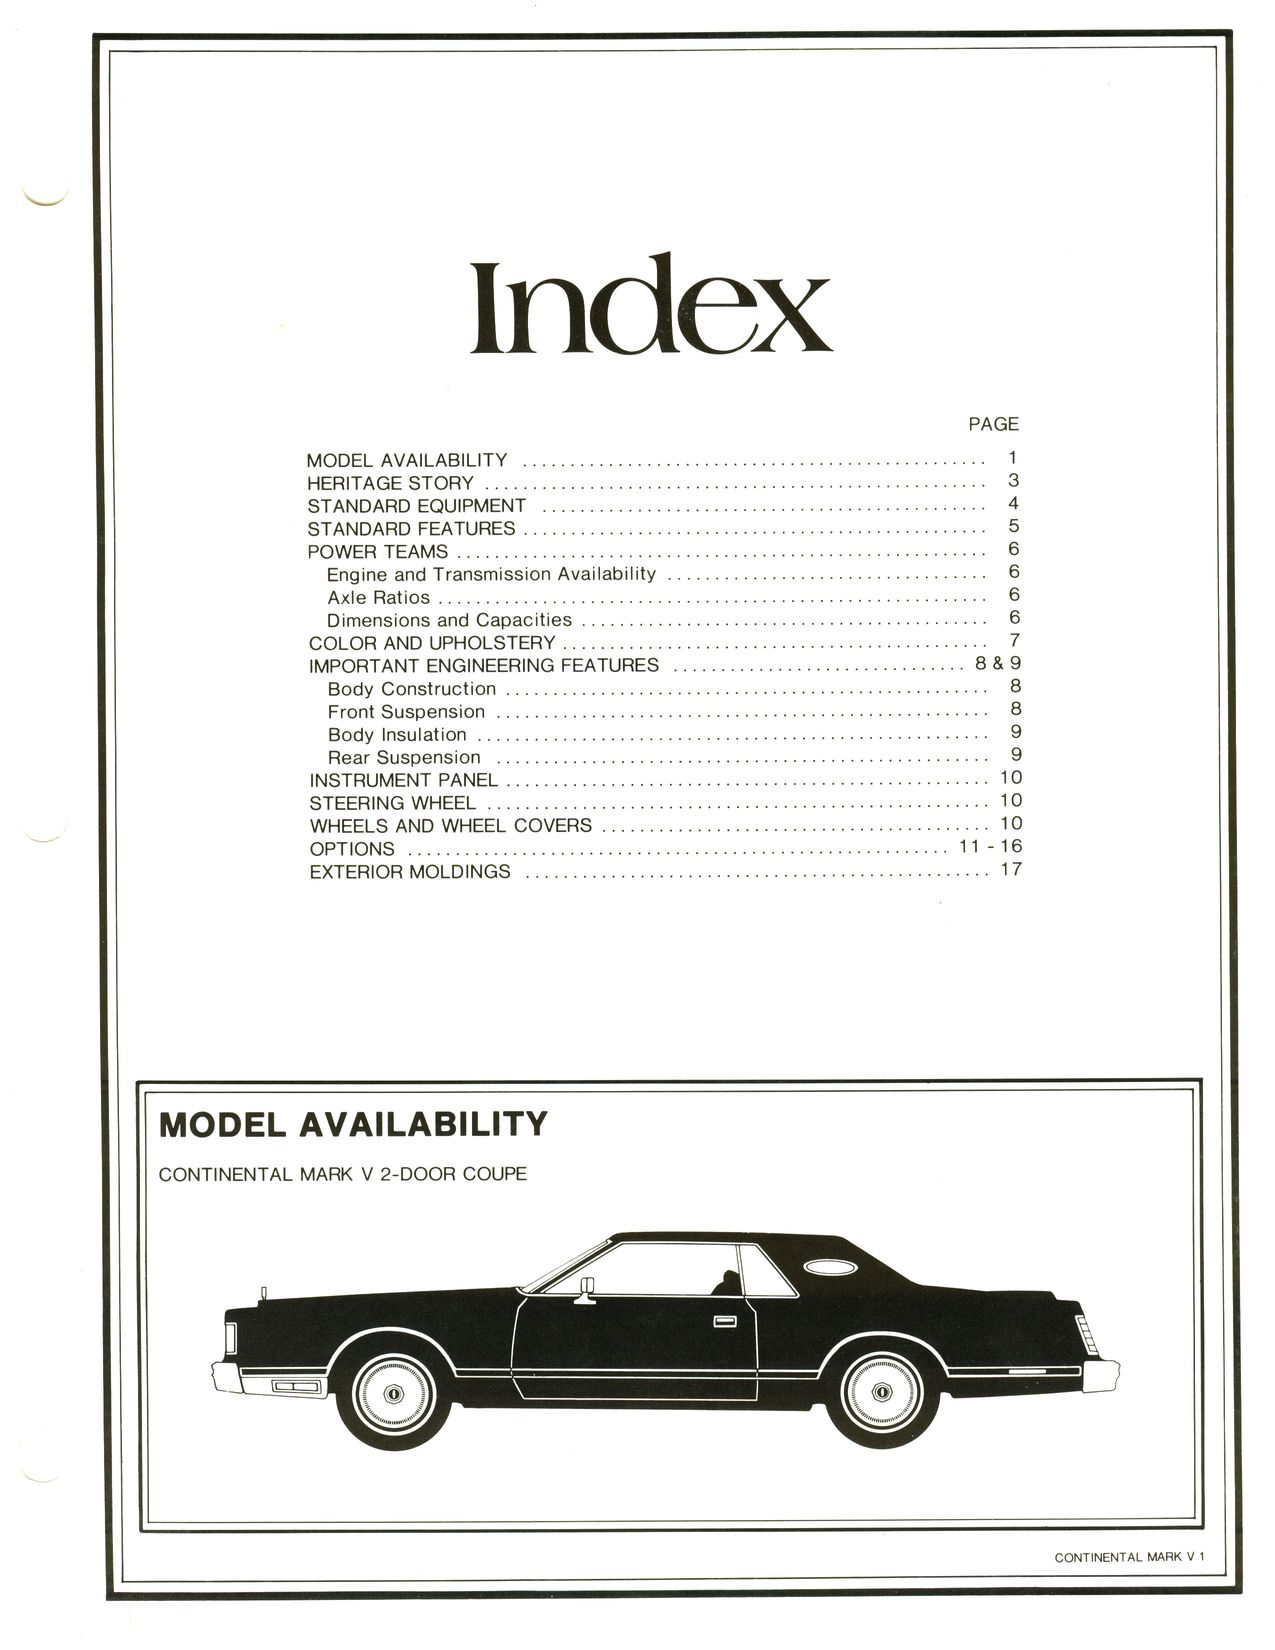 1977 Continental Product Facts Book-1-01